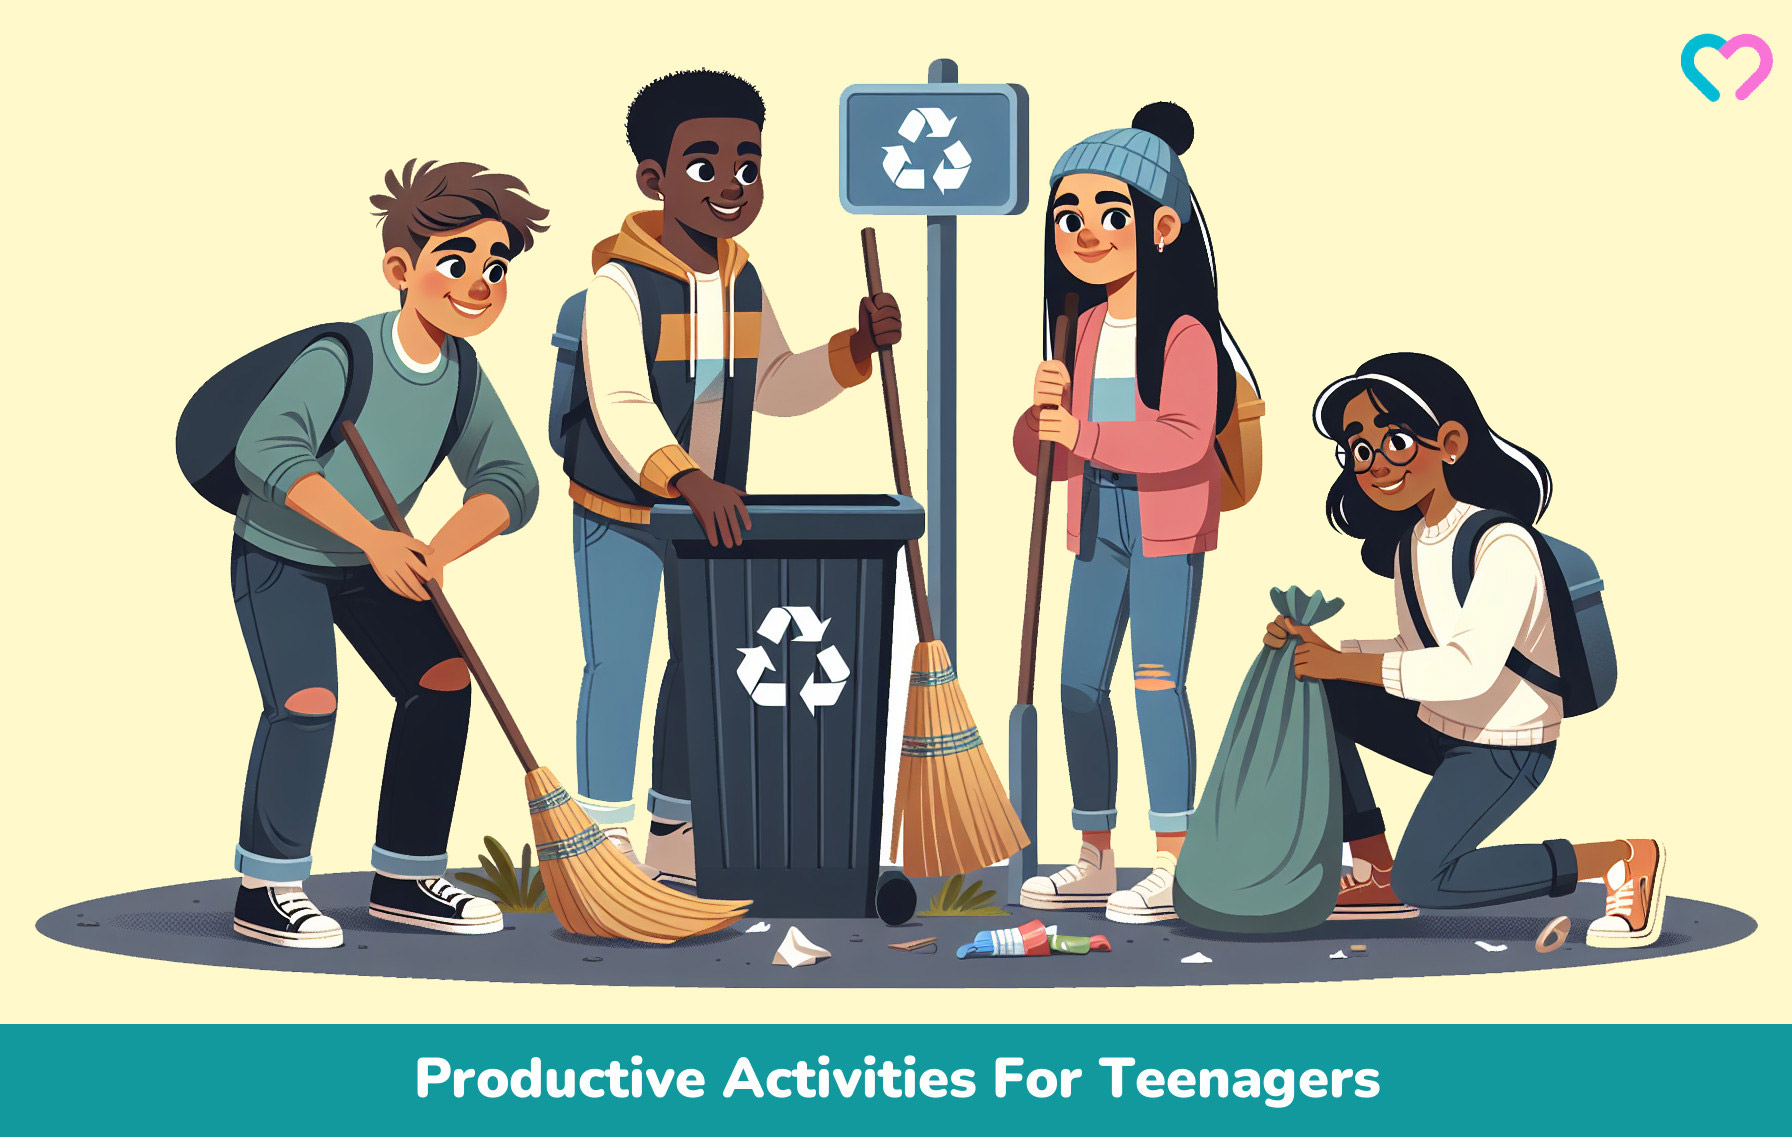 Productive Activities For Teenagers_illustration